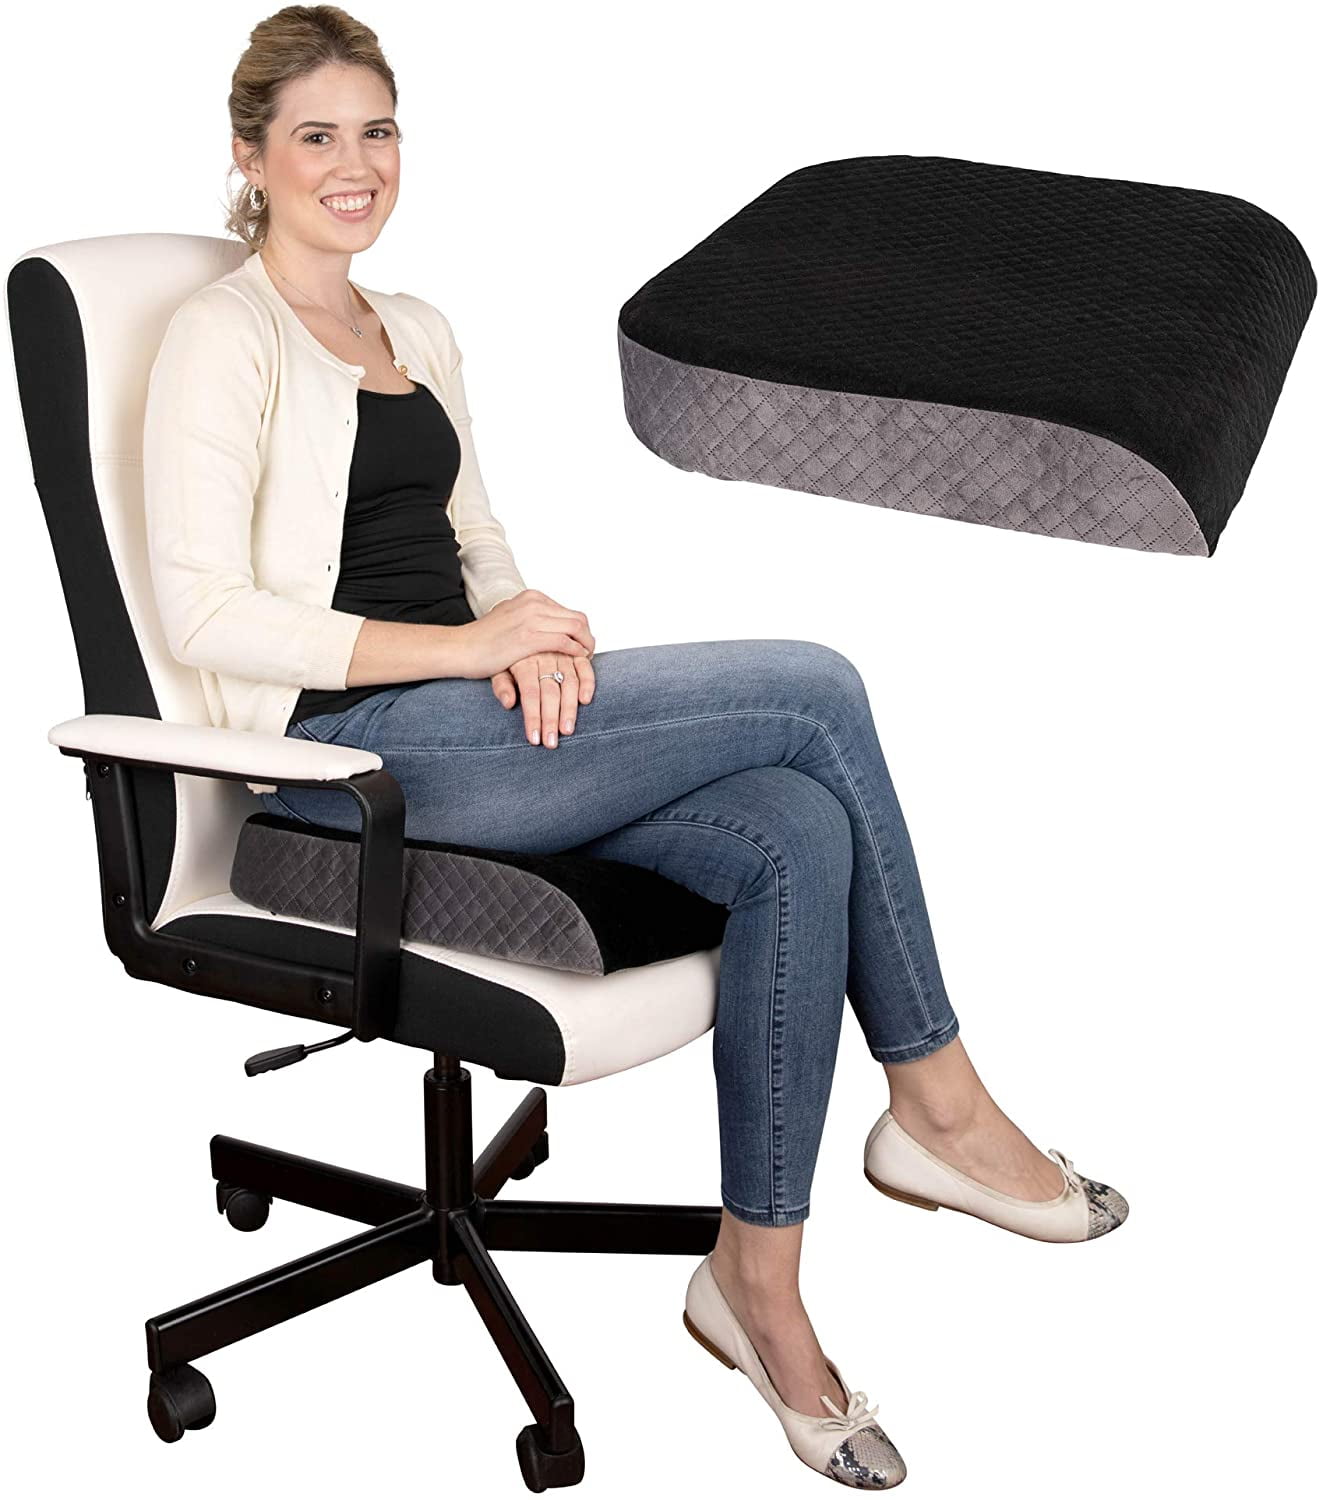 If Truck Drivers Swear By This Memory Foam Cushion For Back Pain